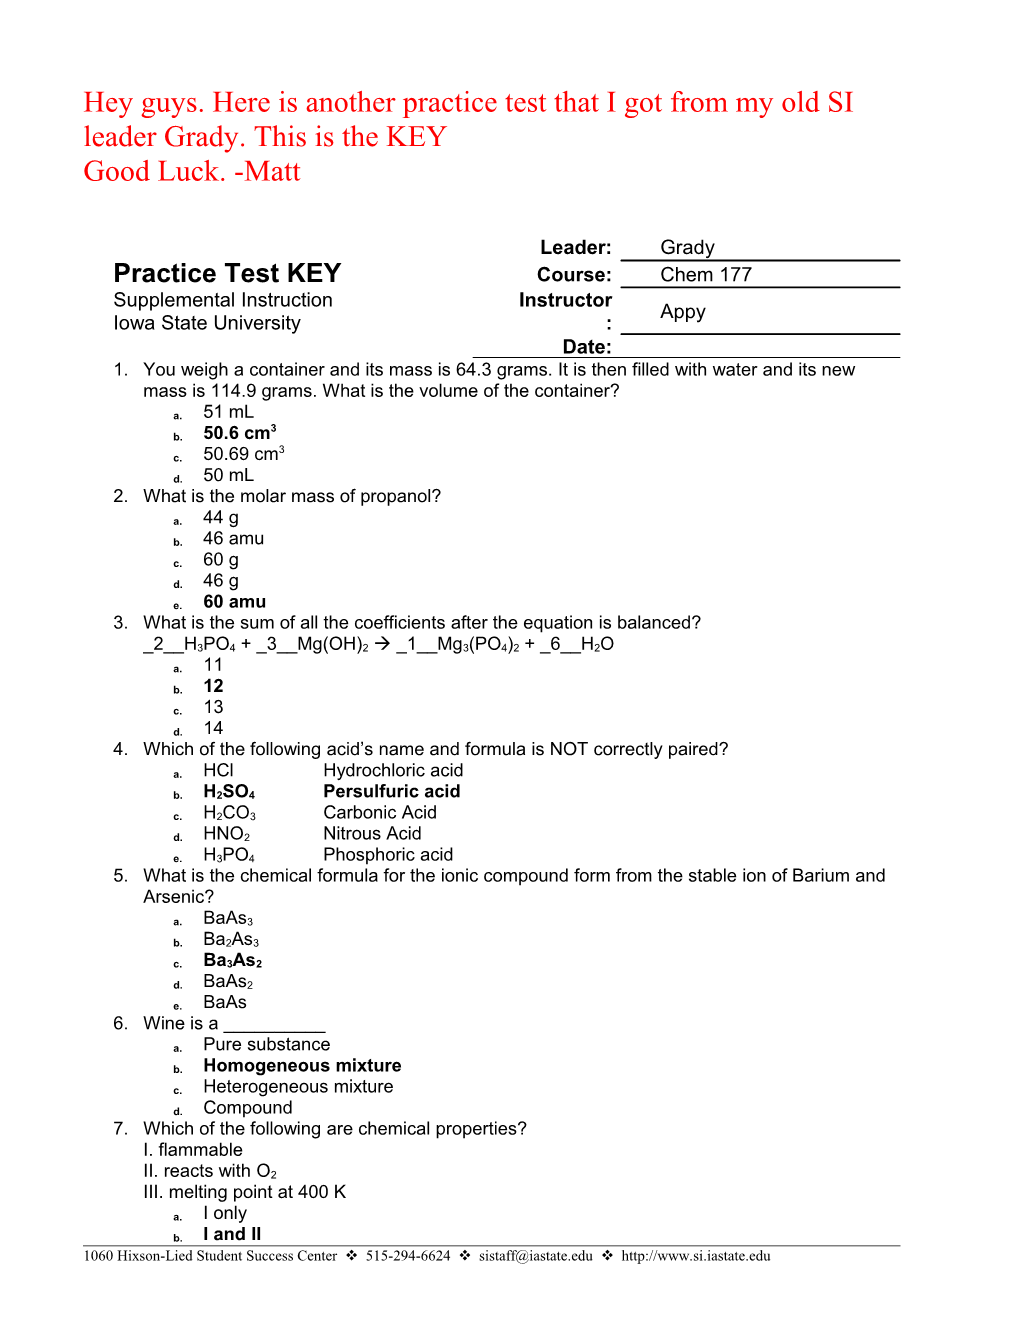 Hey Guys. Here Is Another Practice Test That I Got from My Old SI Leader Grady. This Is the KEY